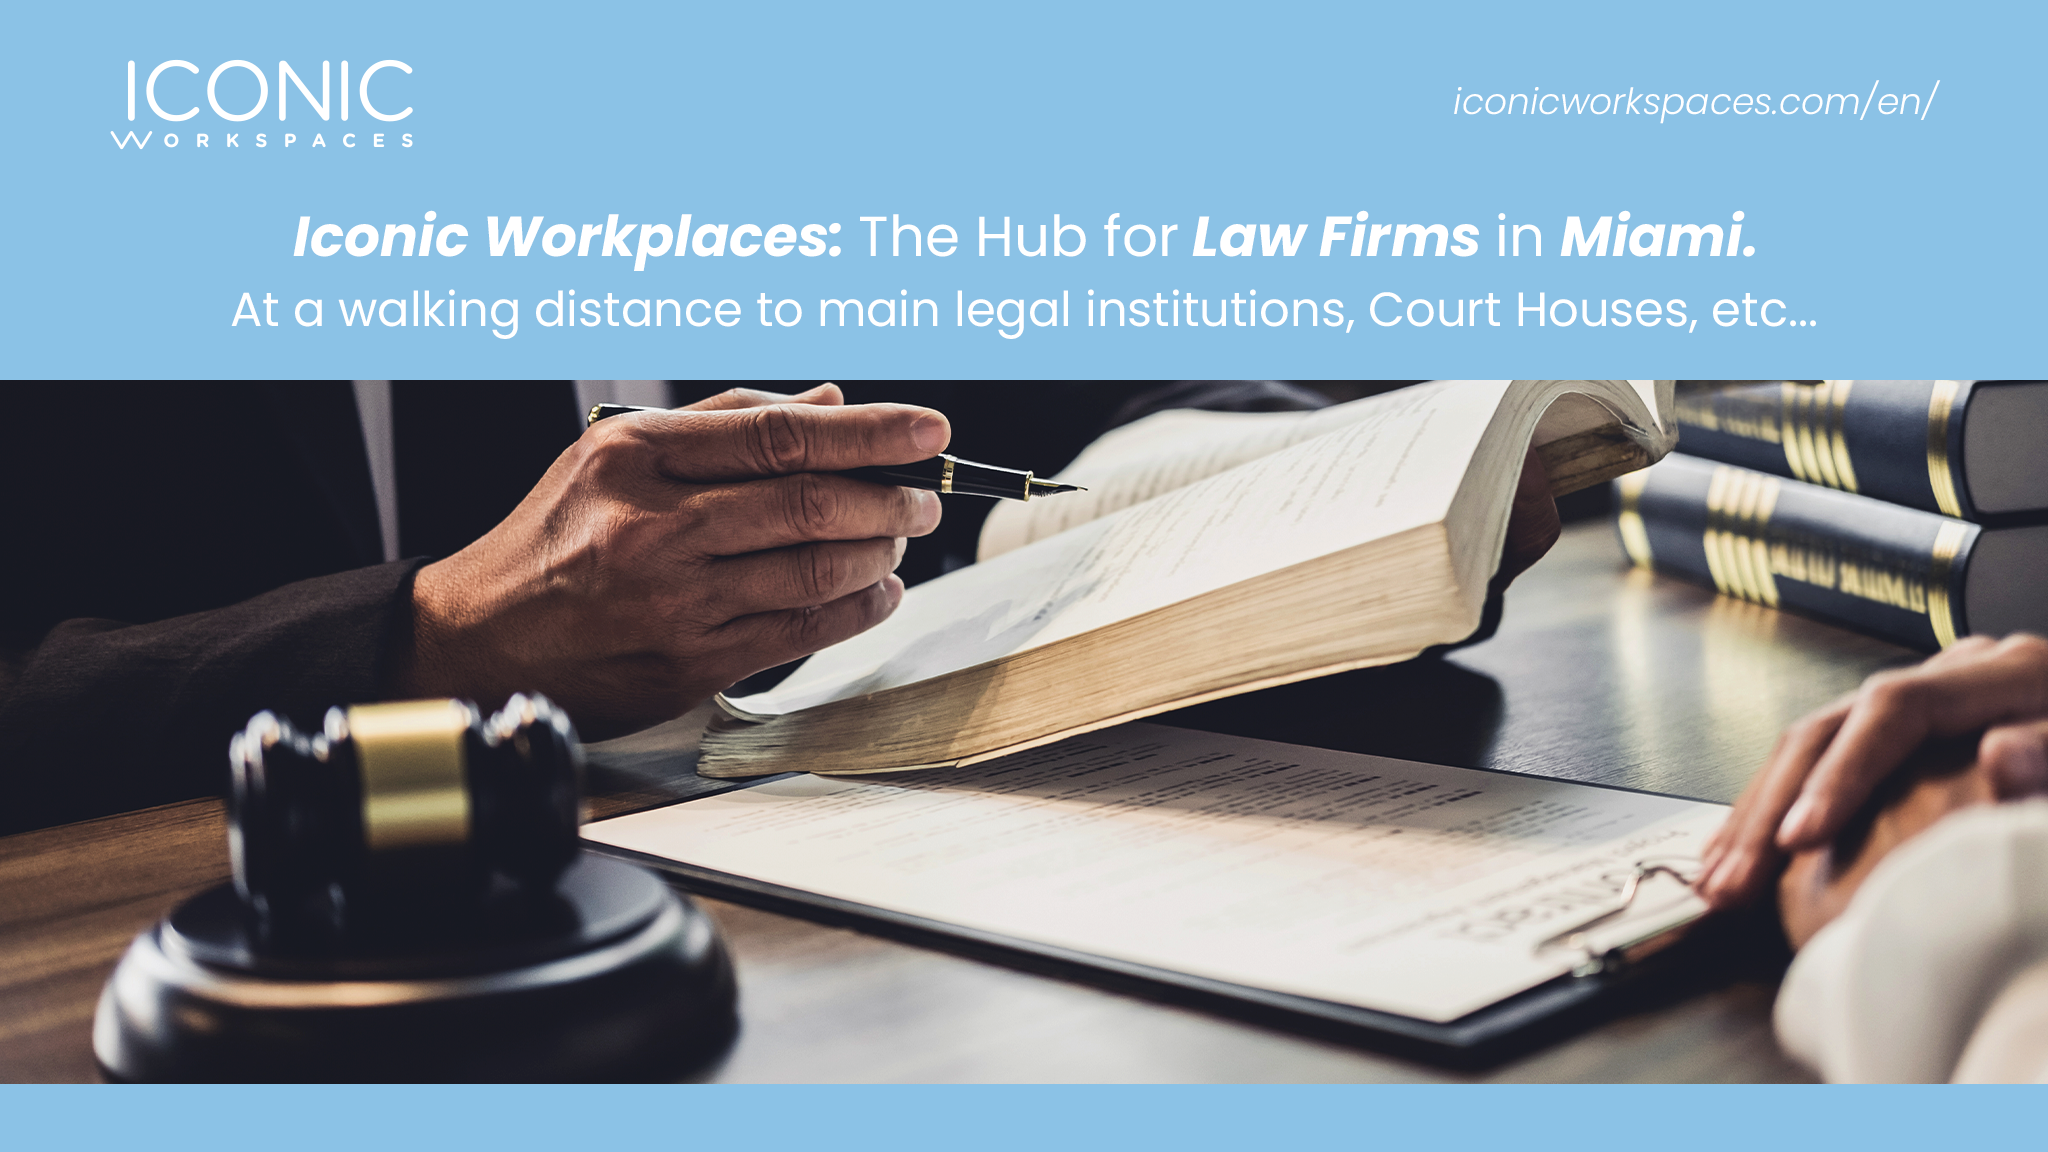 Iconic Workspaces: The Hub for Law Firms in Miami